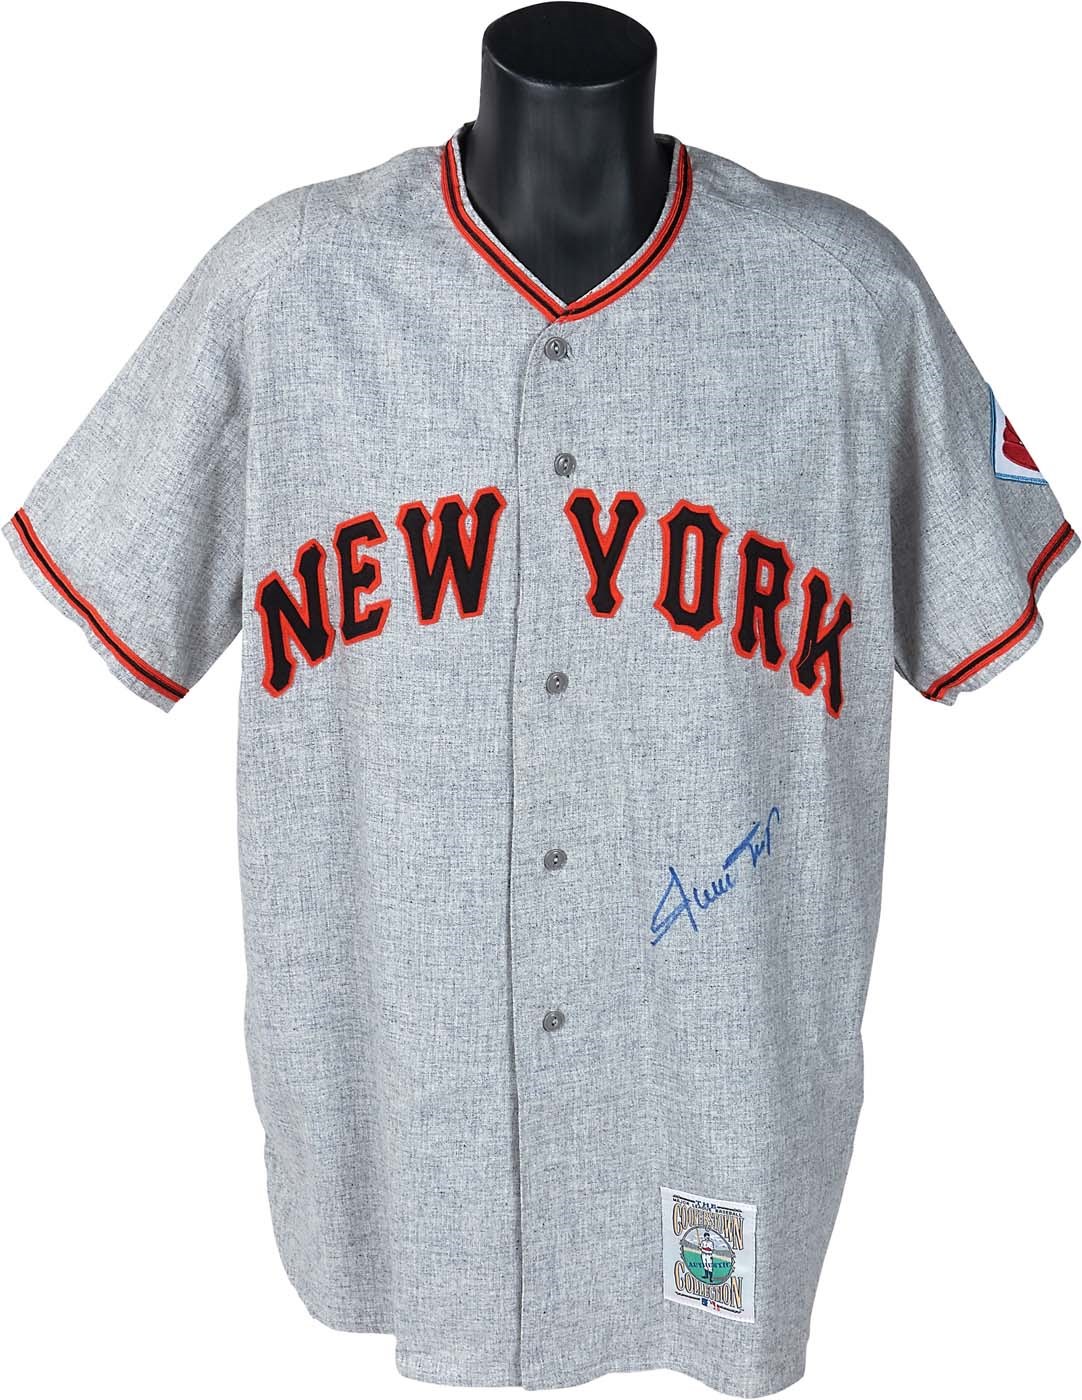 Willie Mays Signed Mitchell & Ness Jersey